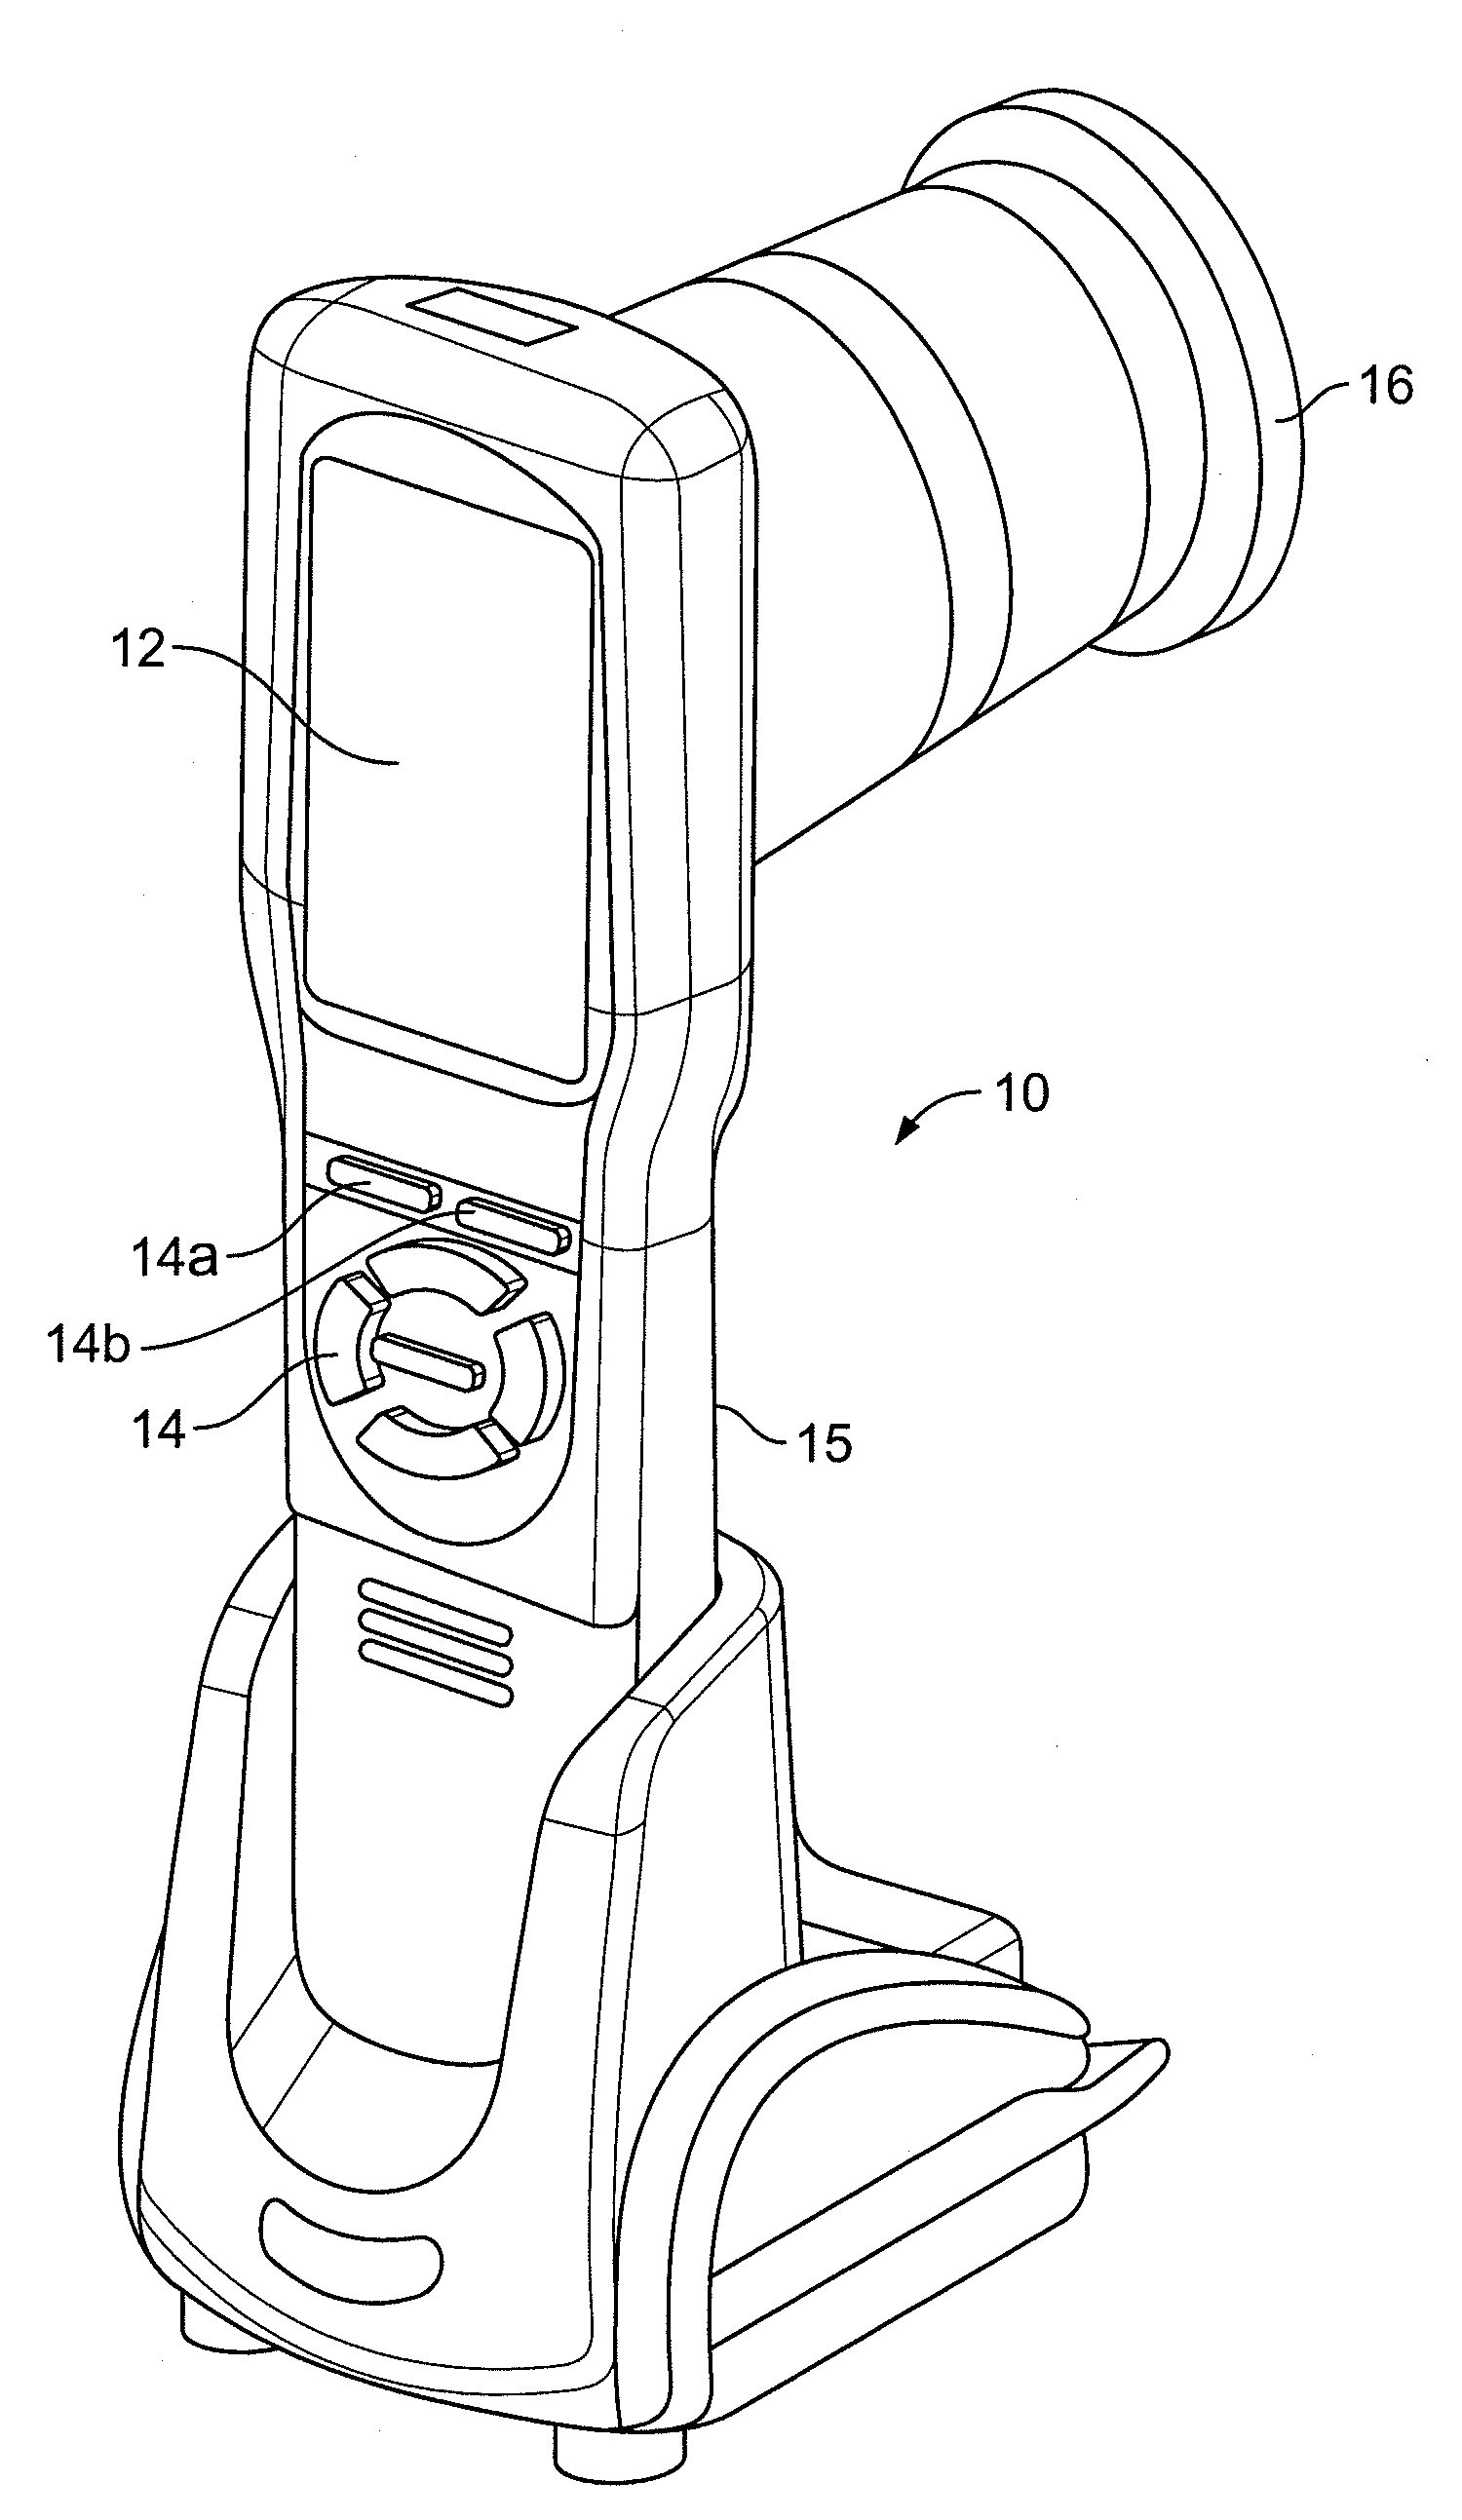 Methods, systems, and devices for monitoring anisocoria and asymmetry of pupillary reaction to stimulus